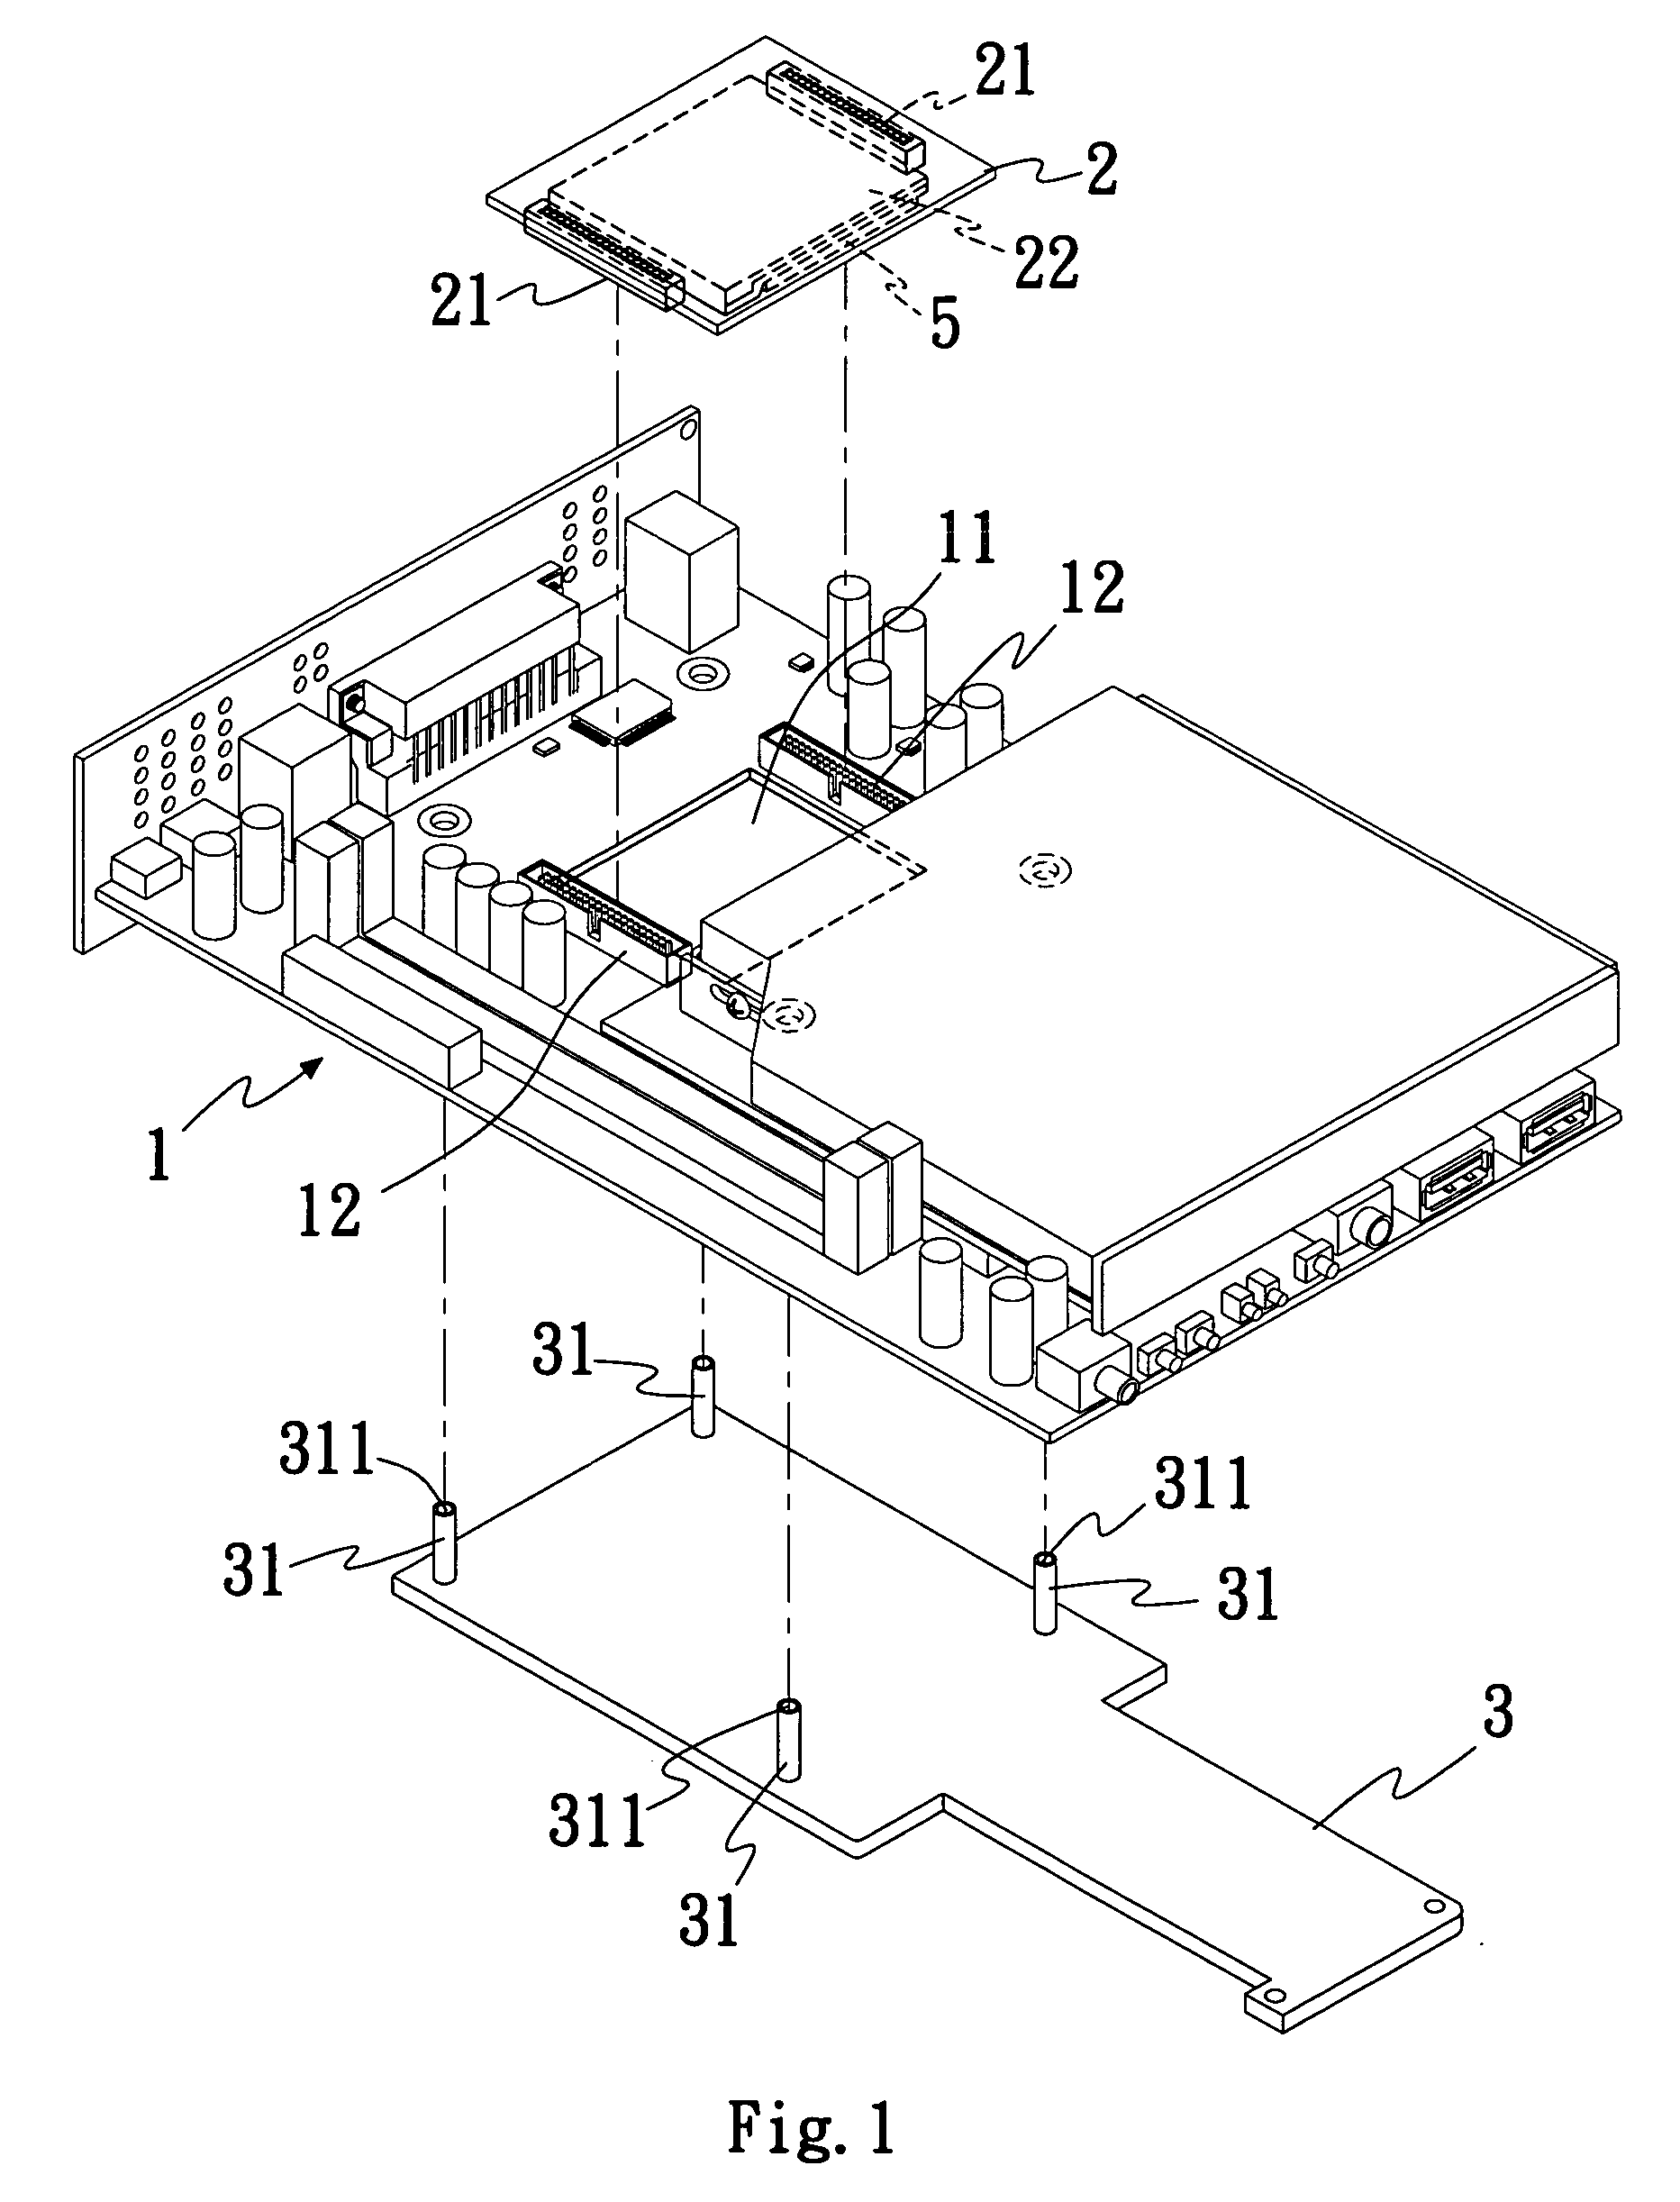 External conductive heat dissipating device for microcomputers